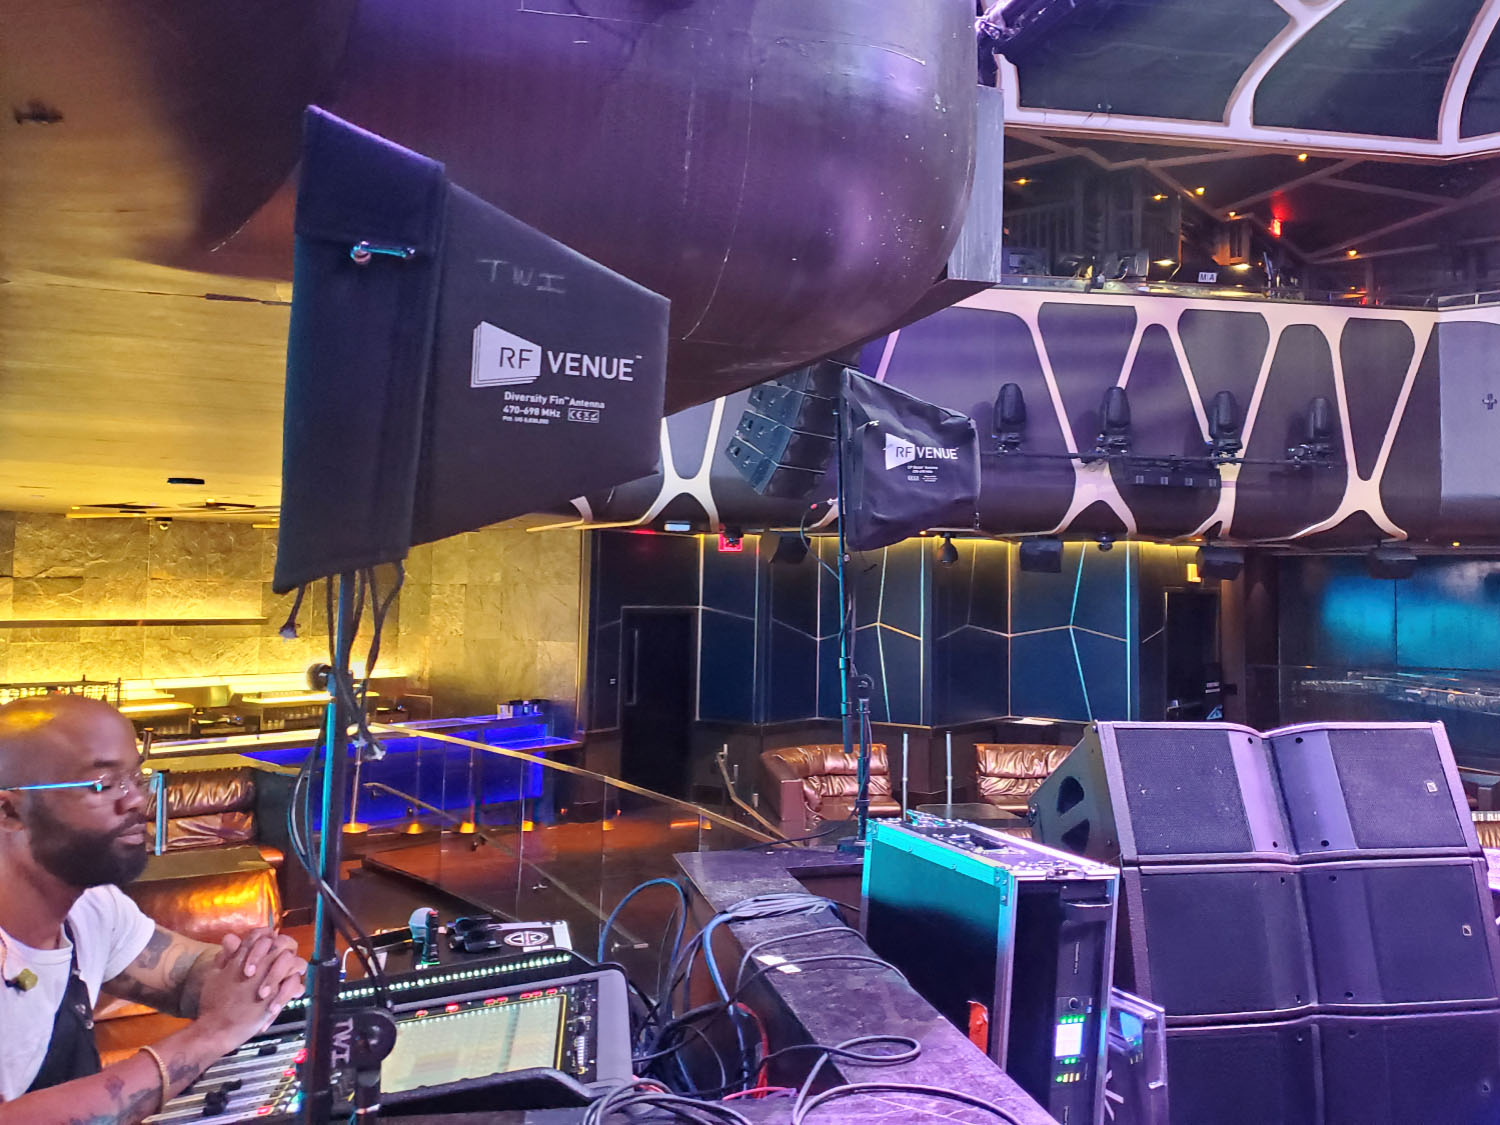 Las Vegas-based sound company The Wave’s wireless audio rig, including RF Venue’s Diversity Fin and CP Beam antennas and COMBINE4 IEM transmitter combiner deployed for hip hop/rap artist Saweetie at Hakkasan Nightclub (MGM Grand Hotel).